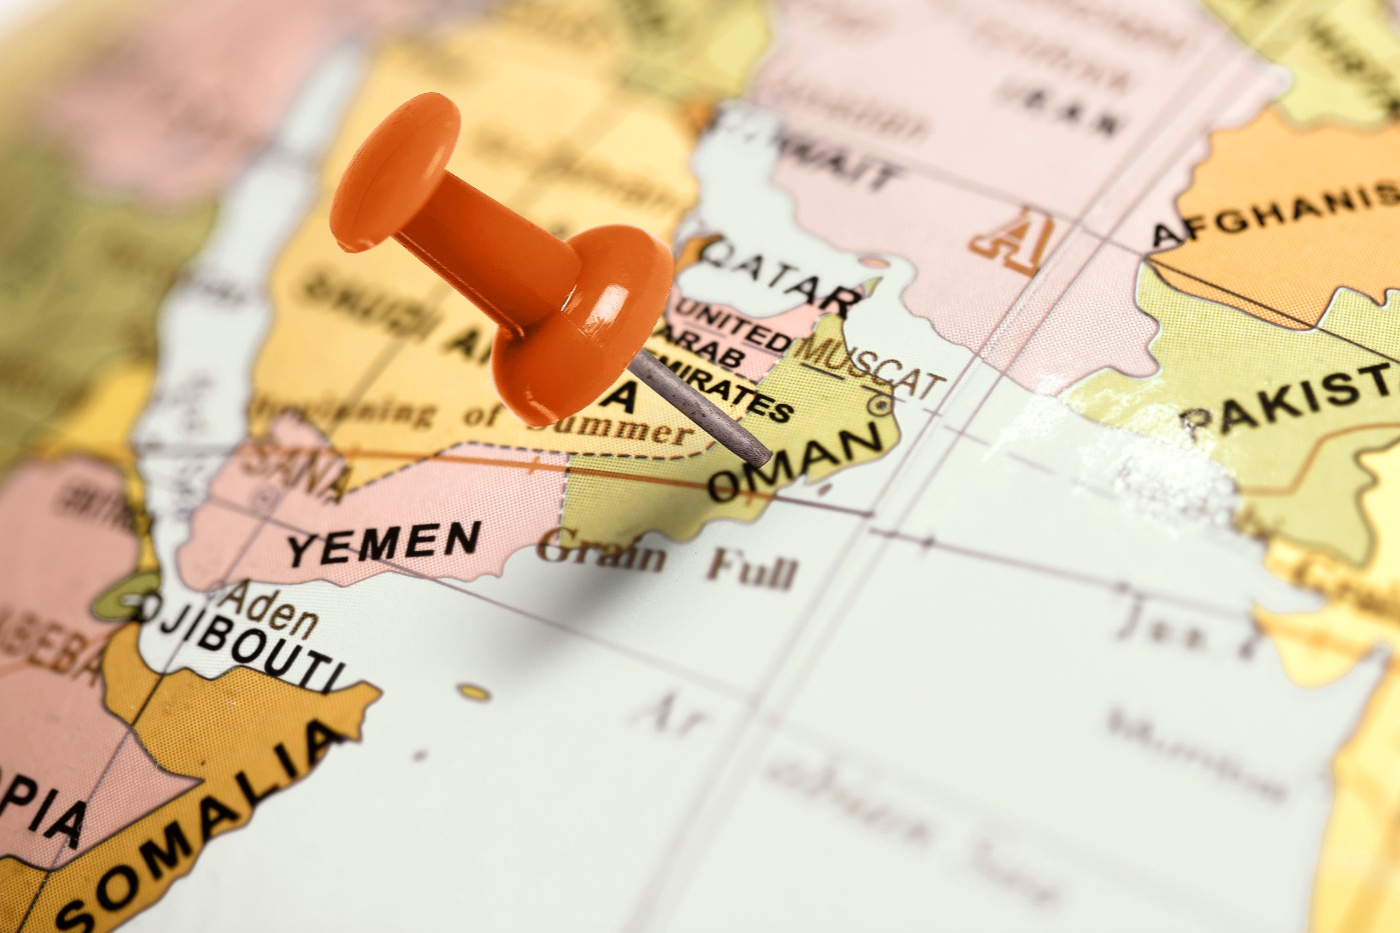 a picture of a map with a red pin placed on the country Oman